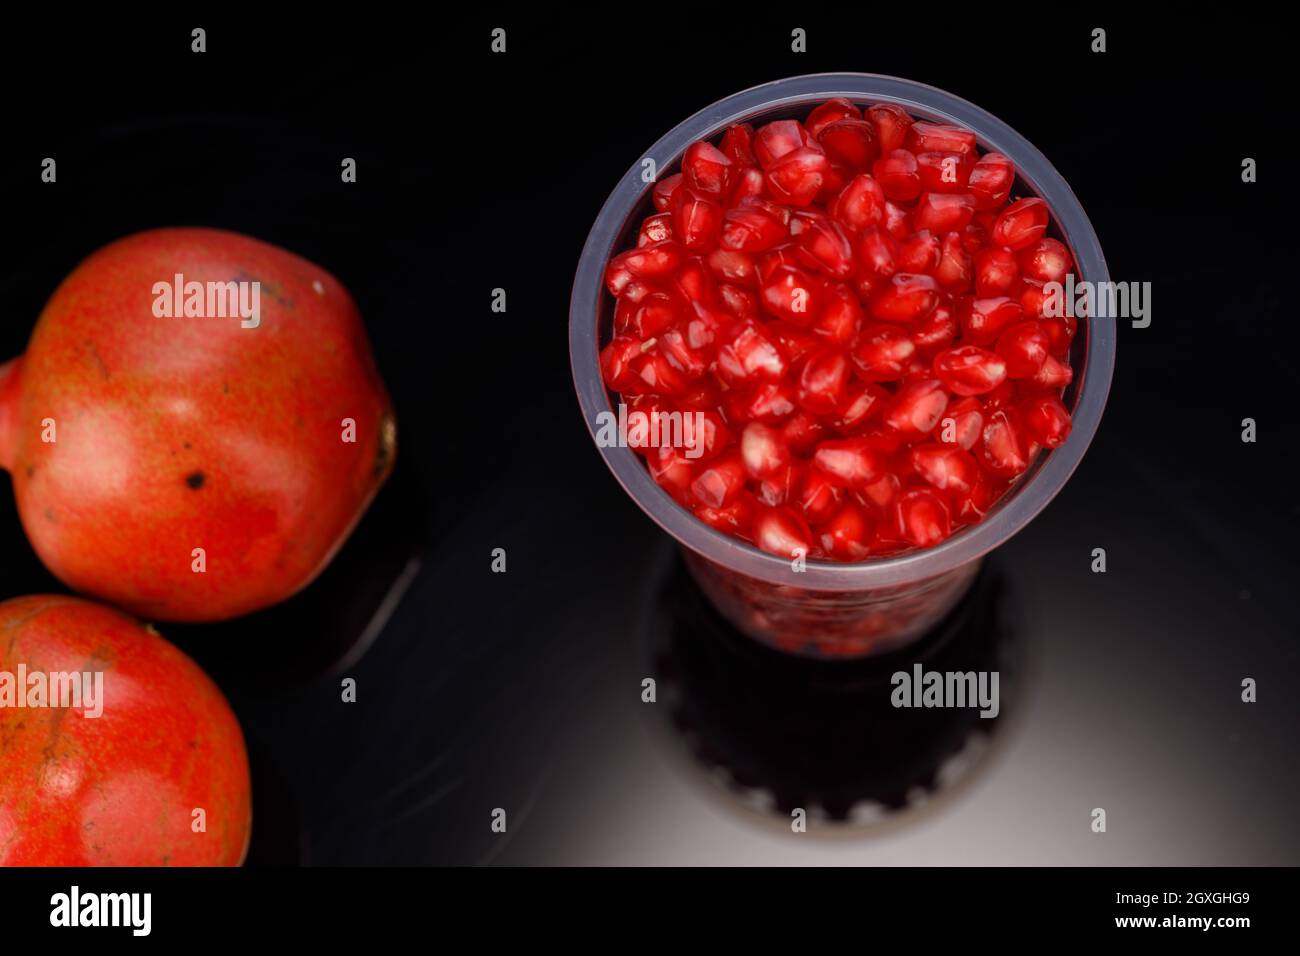 Fresh Pomegranate seed arranged in a  glass  with fresh fruit placed beside it on grey background, isolated. Stock Photo